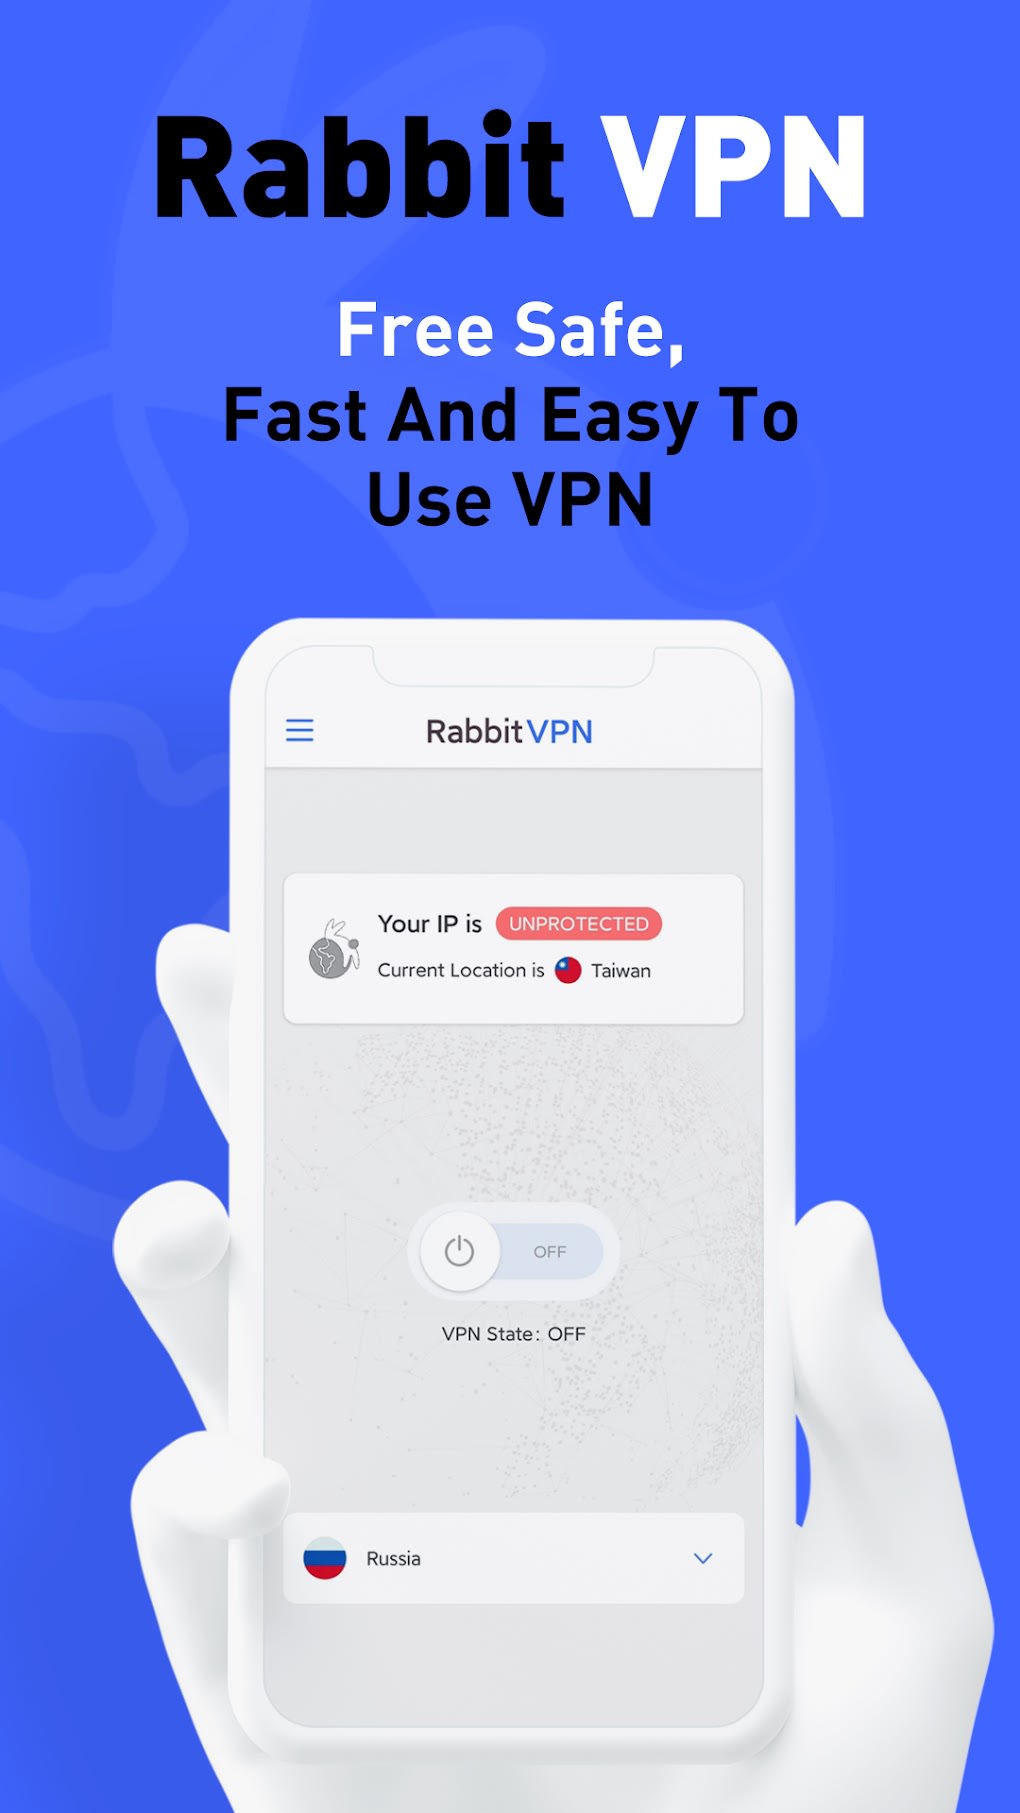 What does Rabbit VPN do?